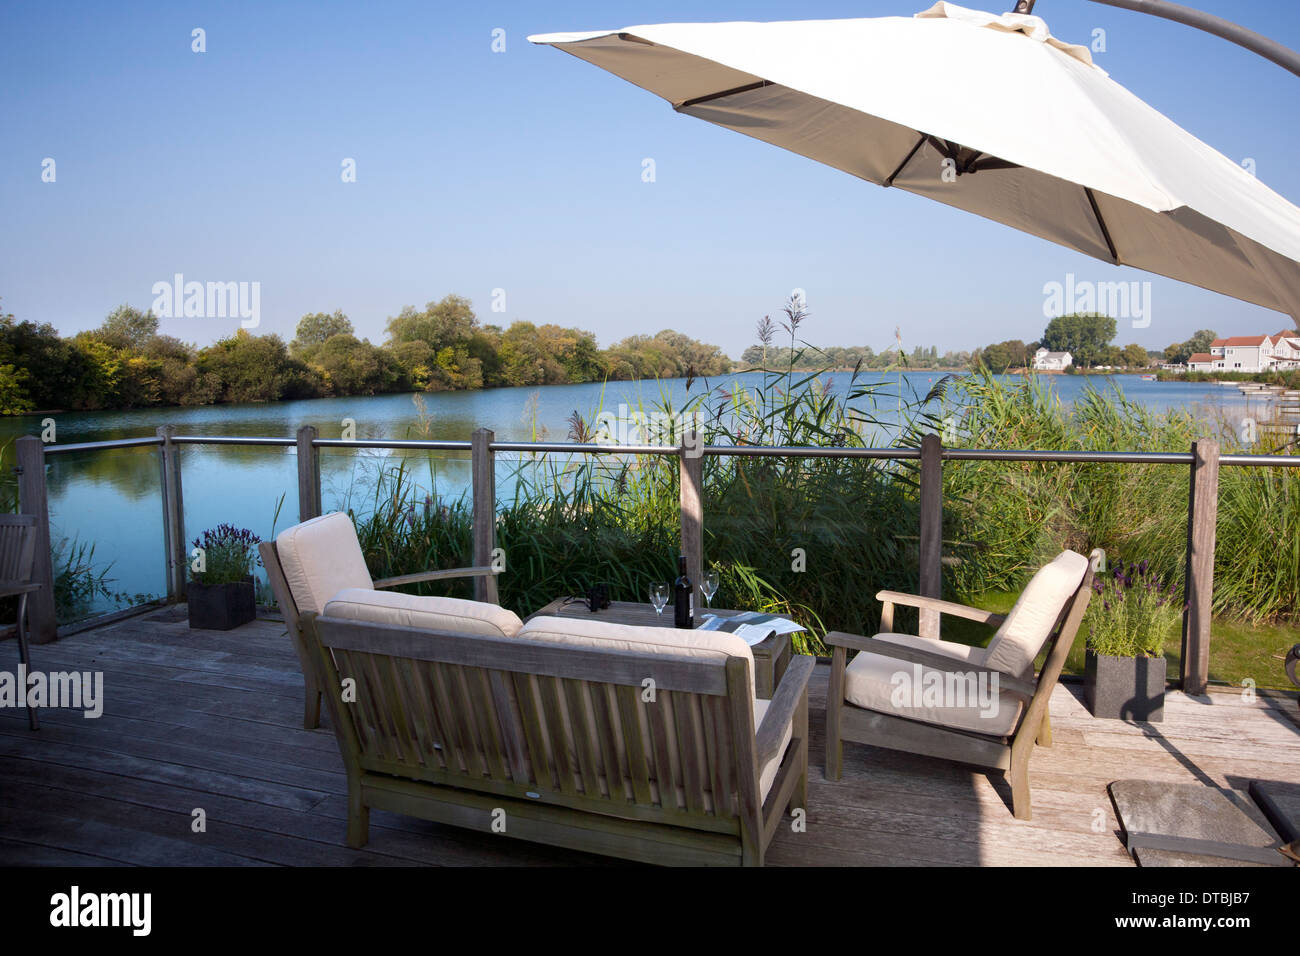 Decking seating area by a lake in The Cotswold Water Park, Gloucestershire, England, UK Stock Photo